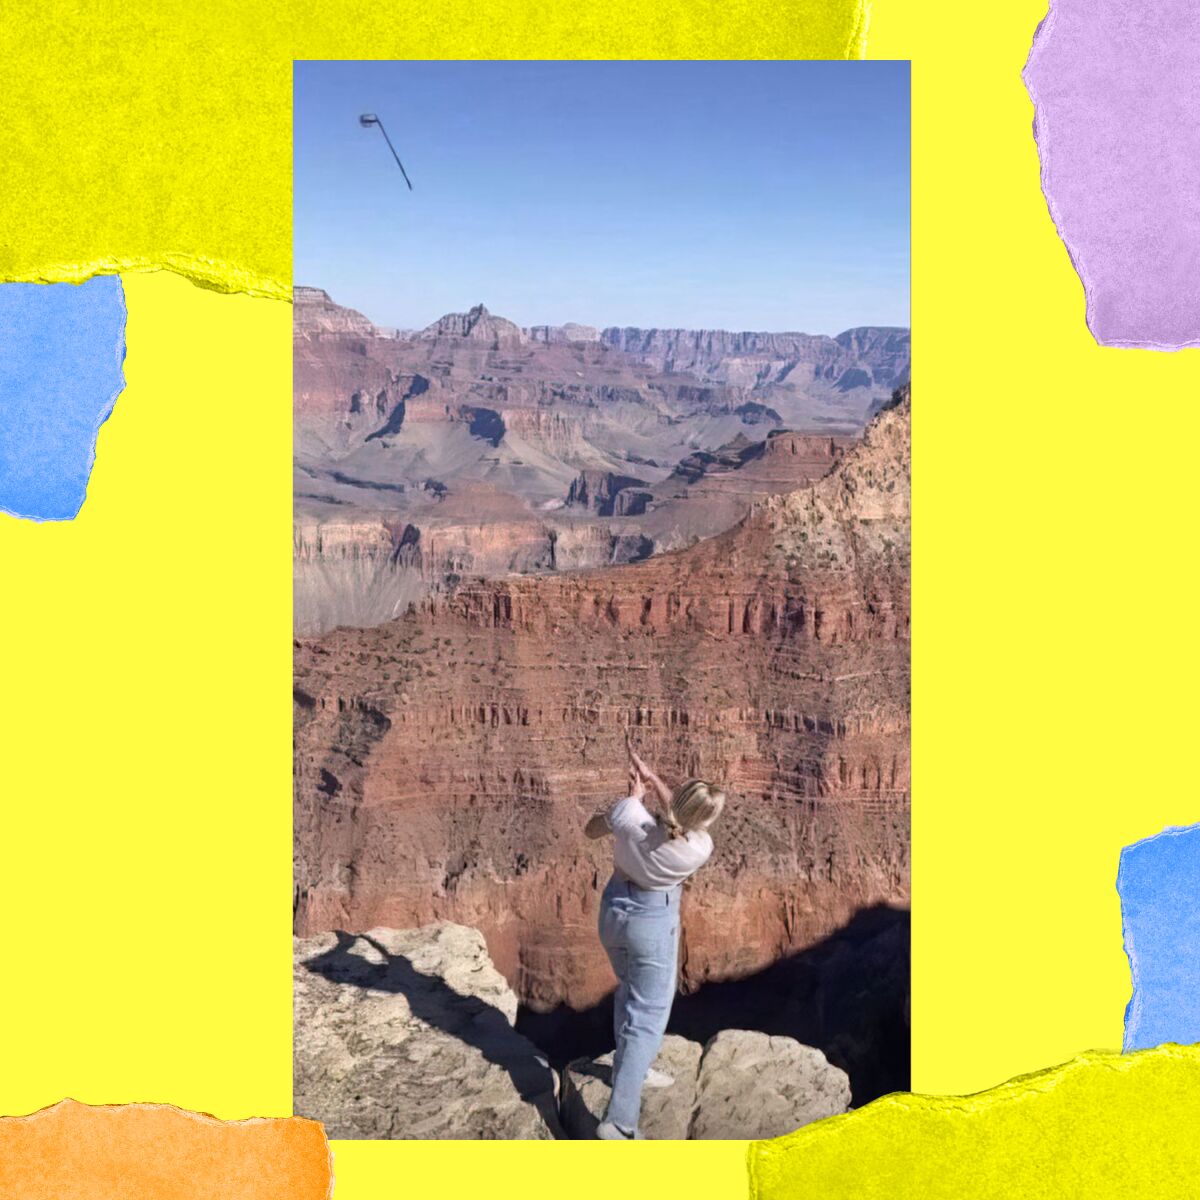 A woman appears to throw a golf club into the air over scenic canyons.